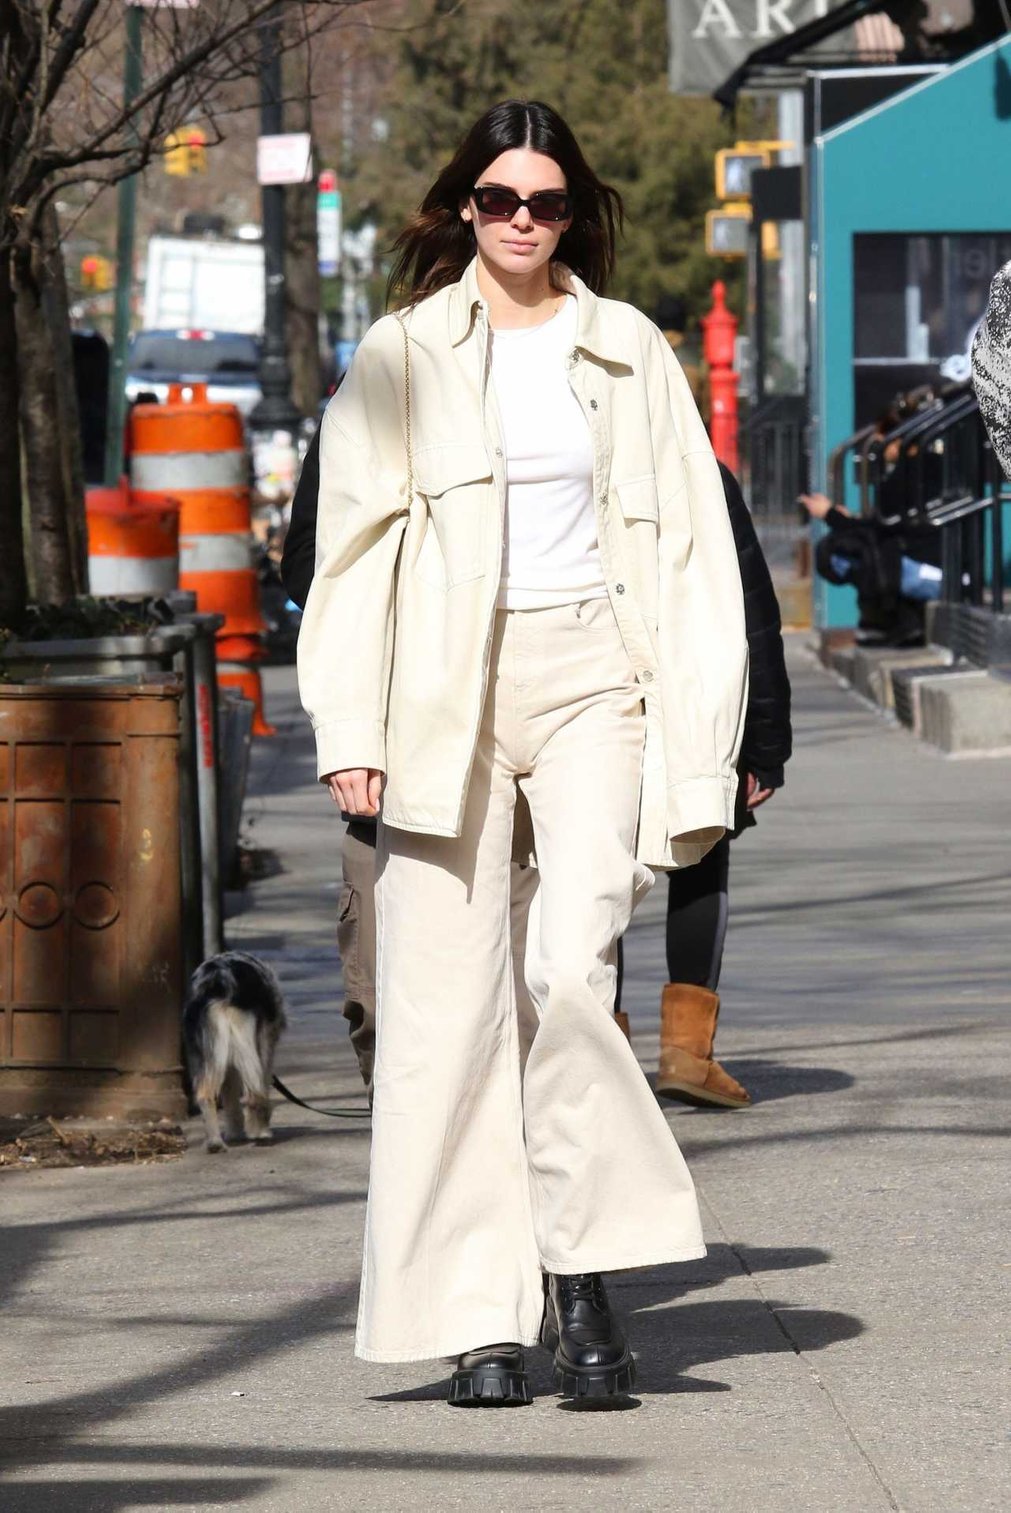 Kendall Jenner 2020 : Kendall Jenner – Goes for a walk with friends after lunch in New York-01